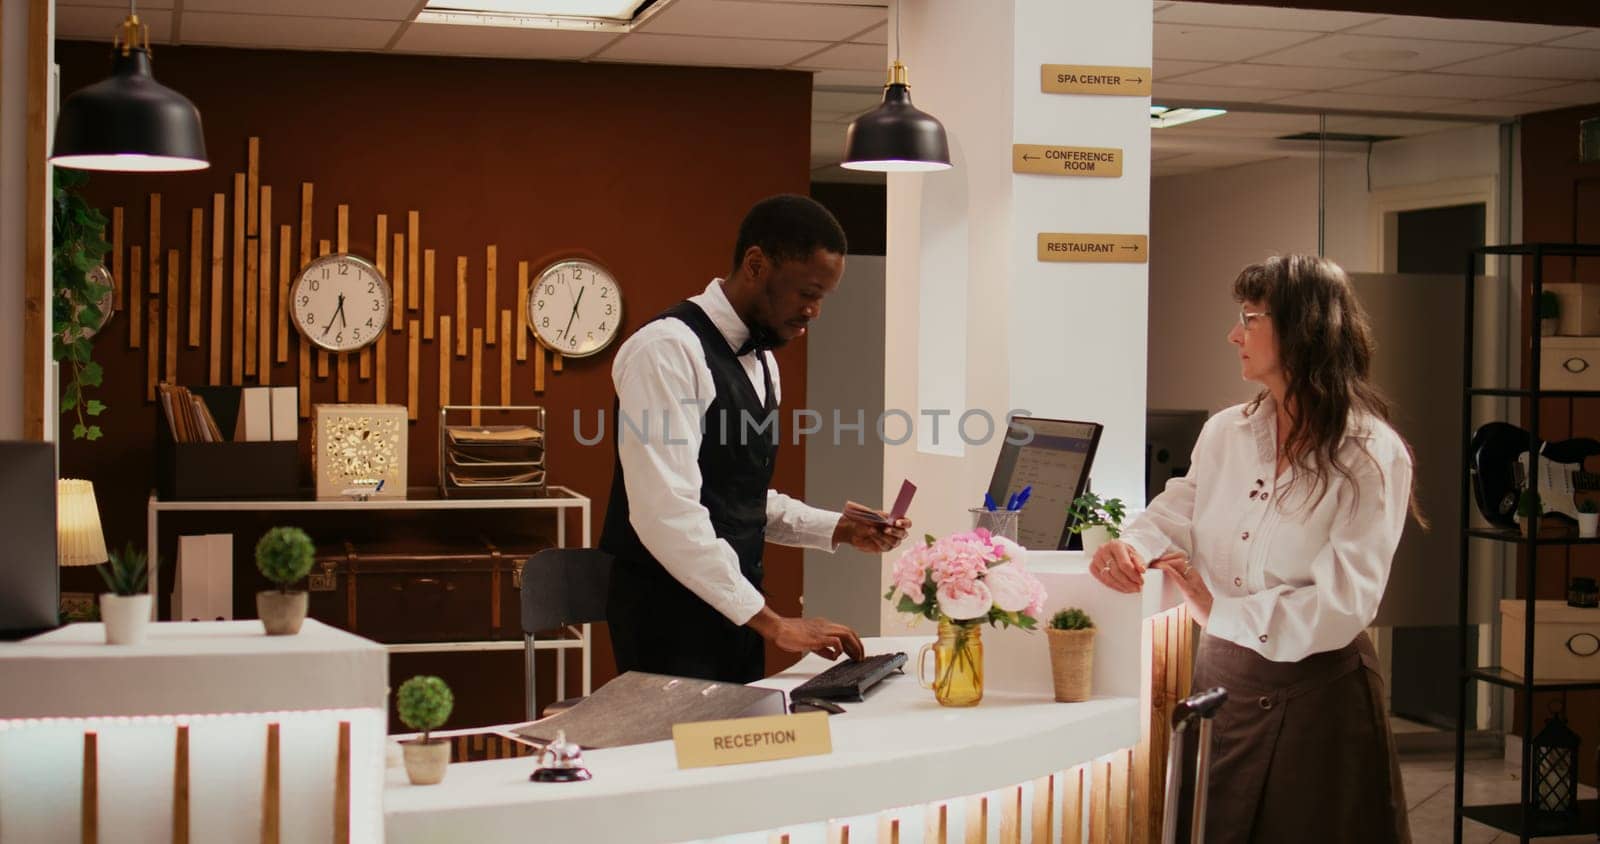 African american worker verifying passport id at front desk before registering for room reservation, concierge services. Staff assisting old woman with check in, hospitality industry.